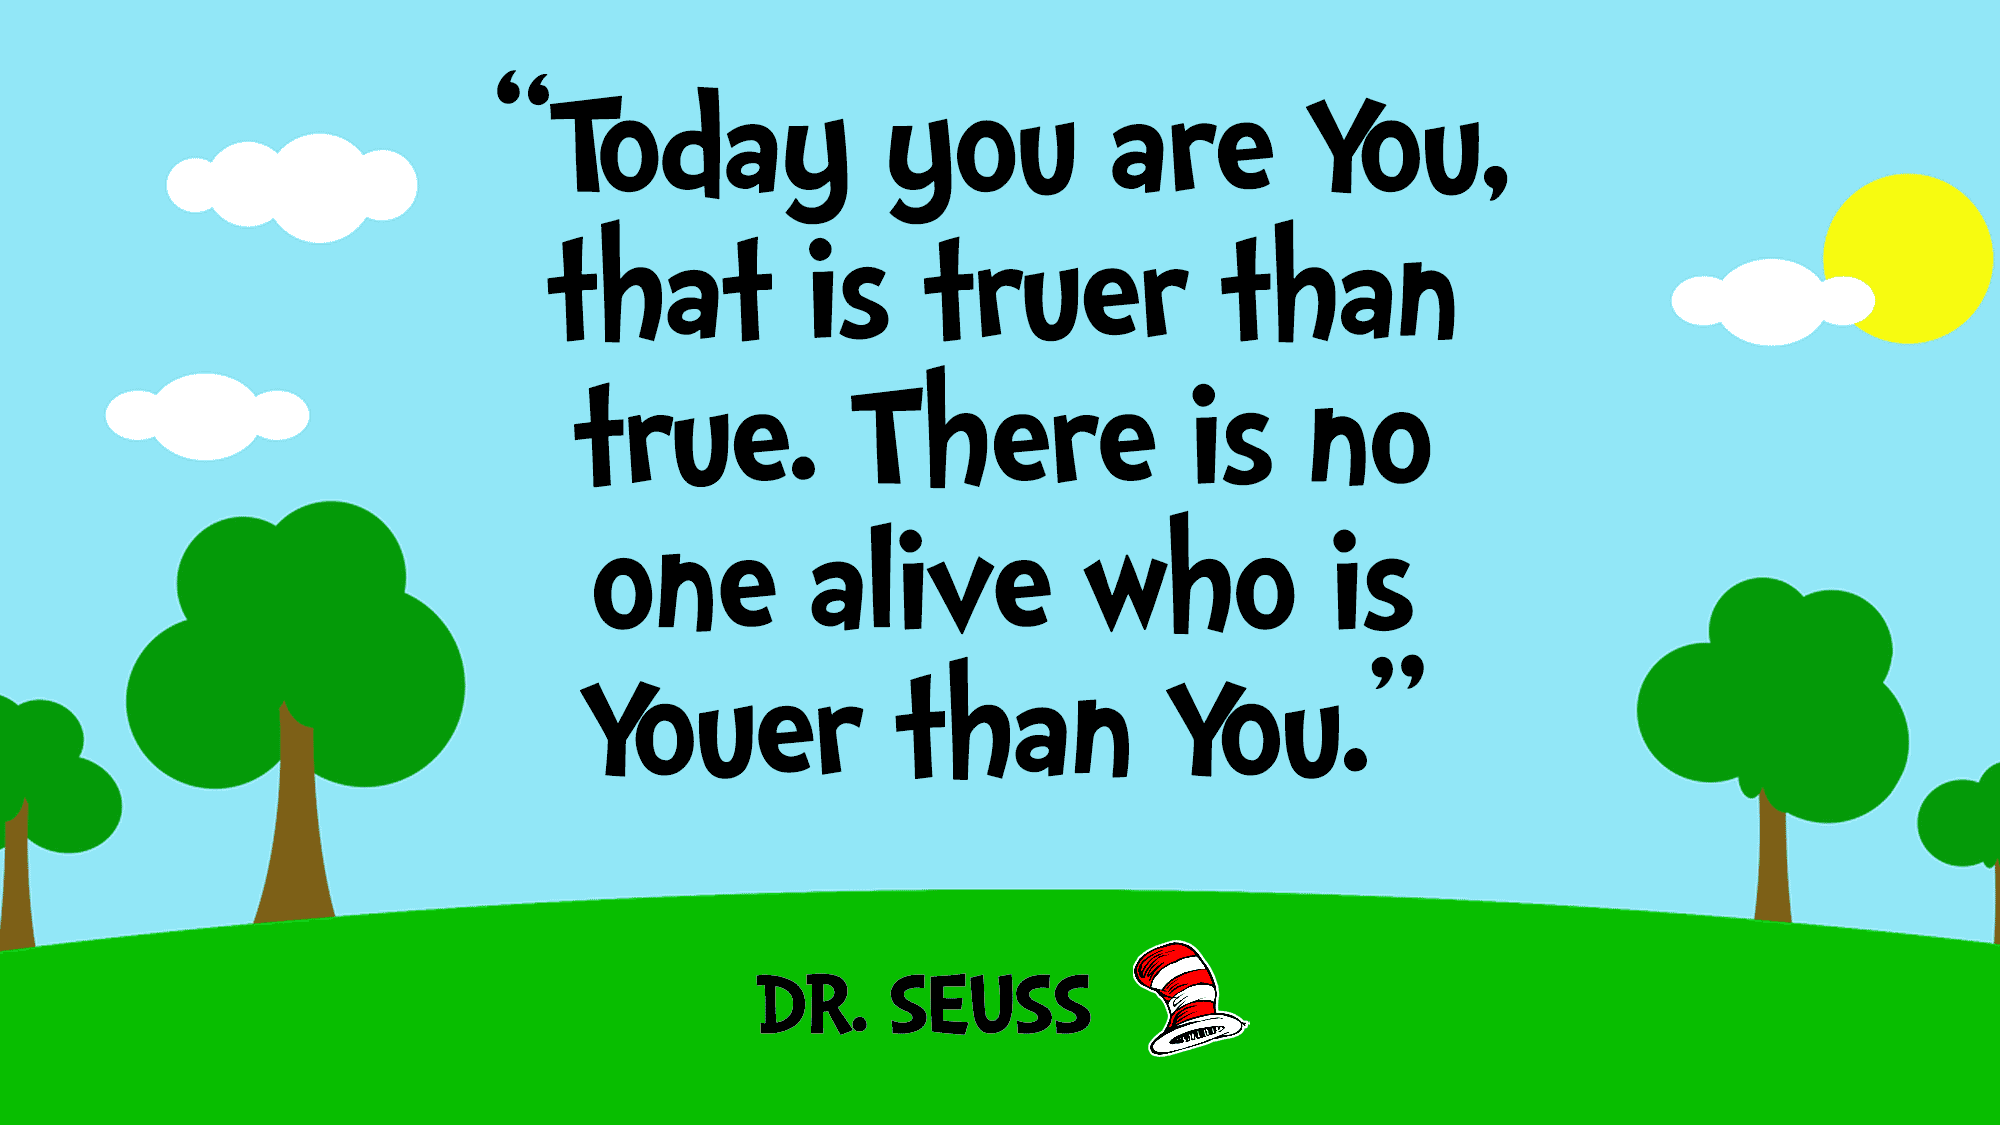 22 Inspirational Dr Seuss Quotes To Help Motivate Your Life